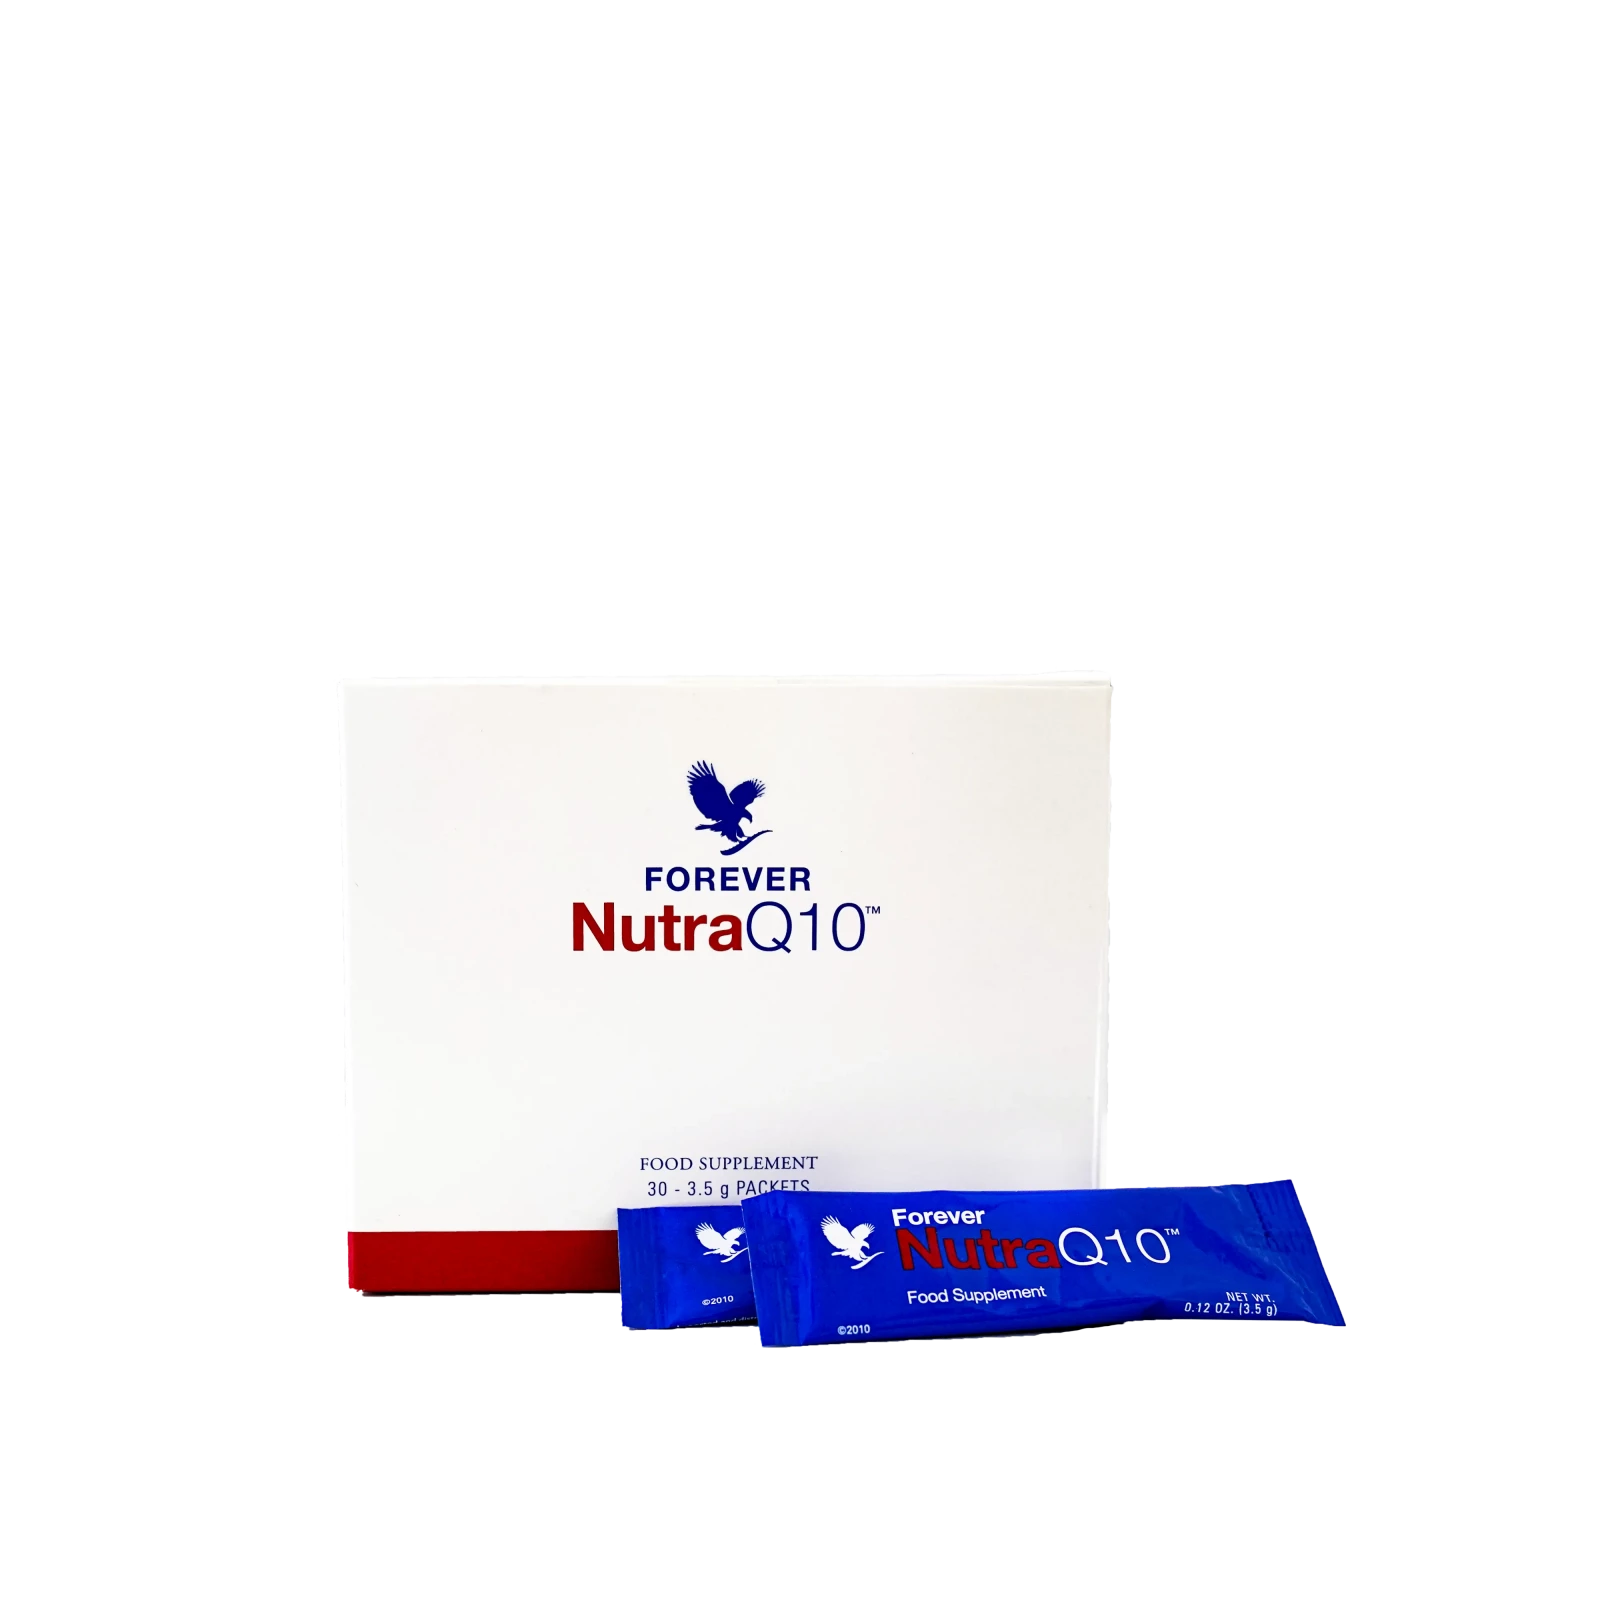 Nutra Q10™